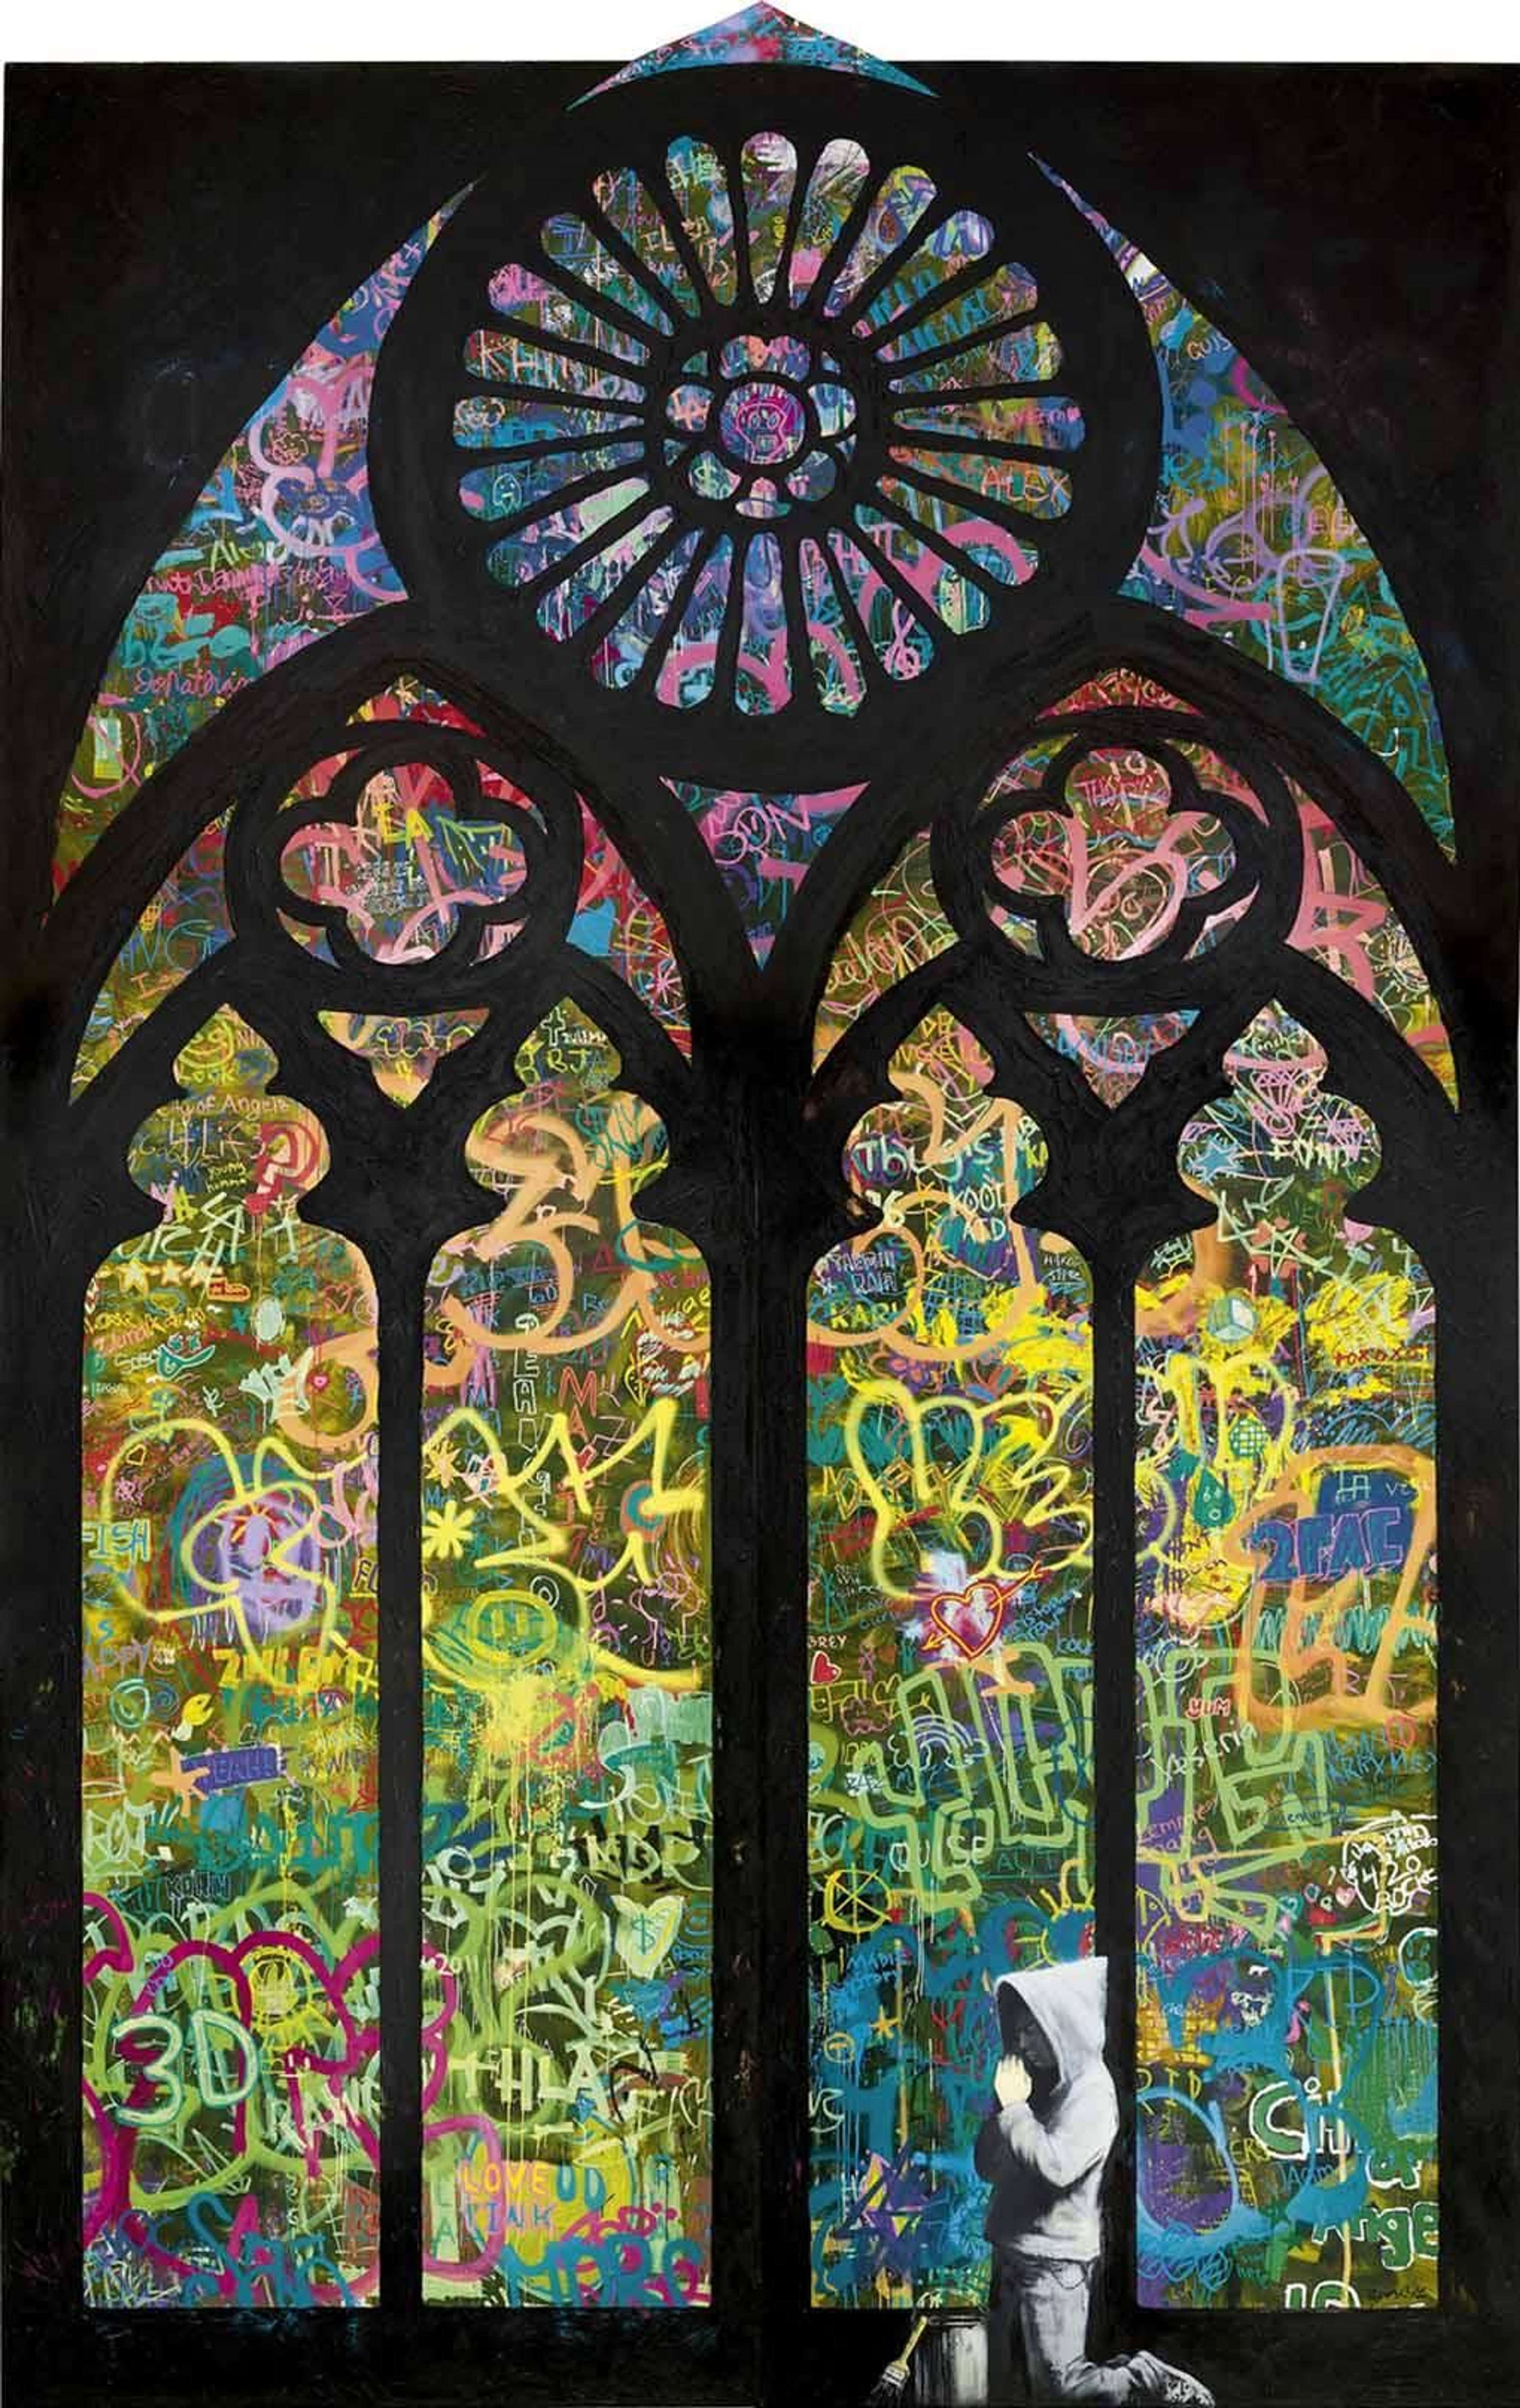 Banksy's Forgive Us Our Trespassing. A mixed media work of graffiti style stained glass windows with someone in white, kneeling and praying in front of them.